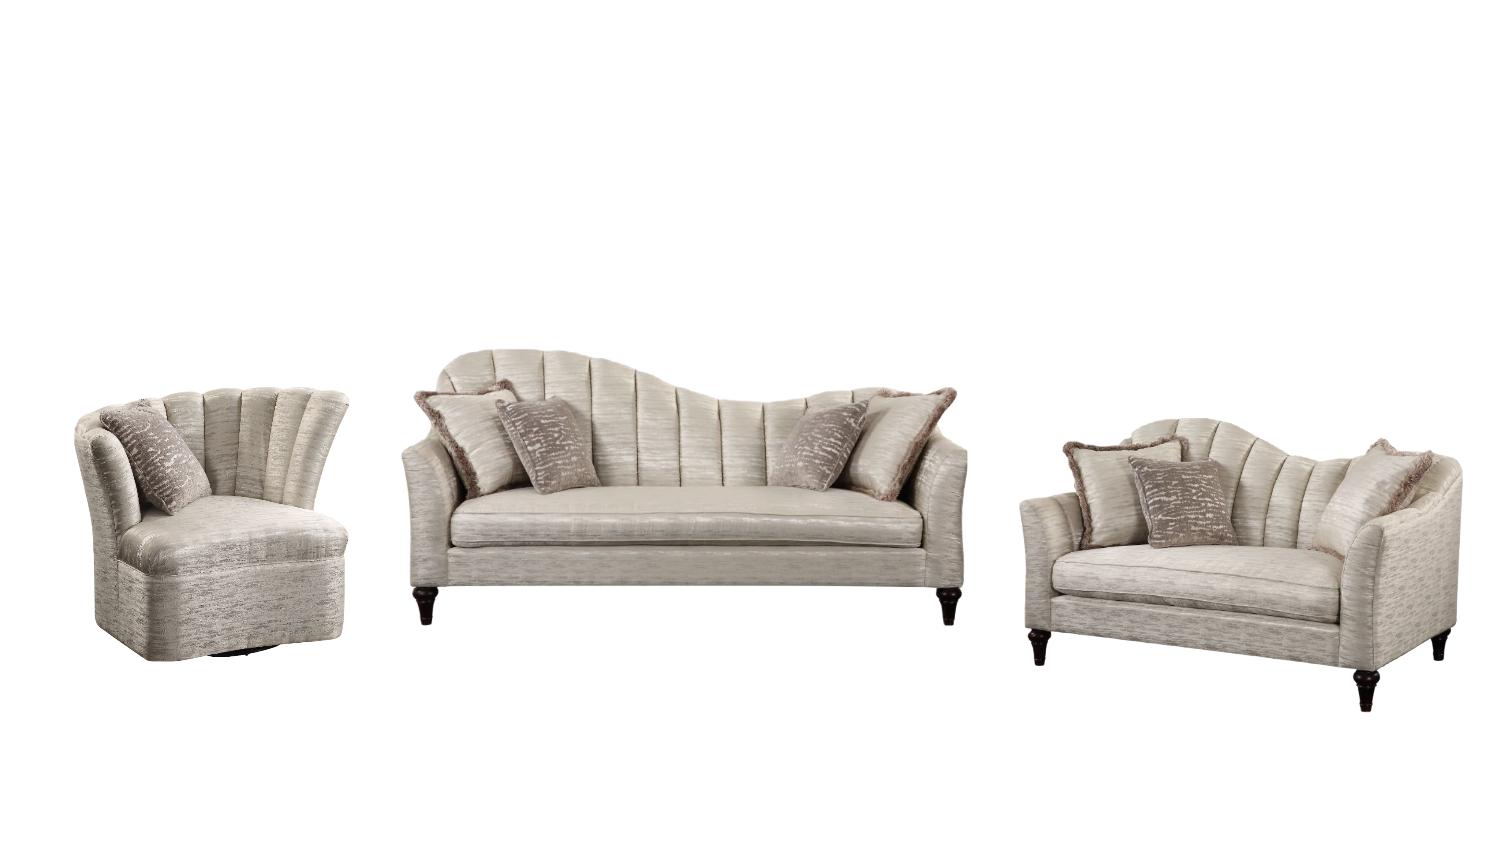 Transitional Sofa Loveseat and Chair Set Athalia 55305-3pcs in Pearl 